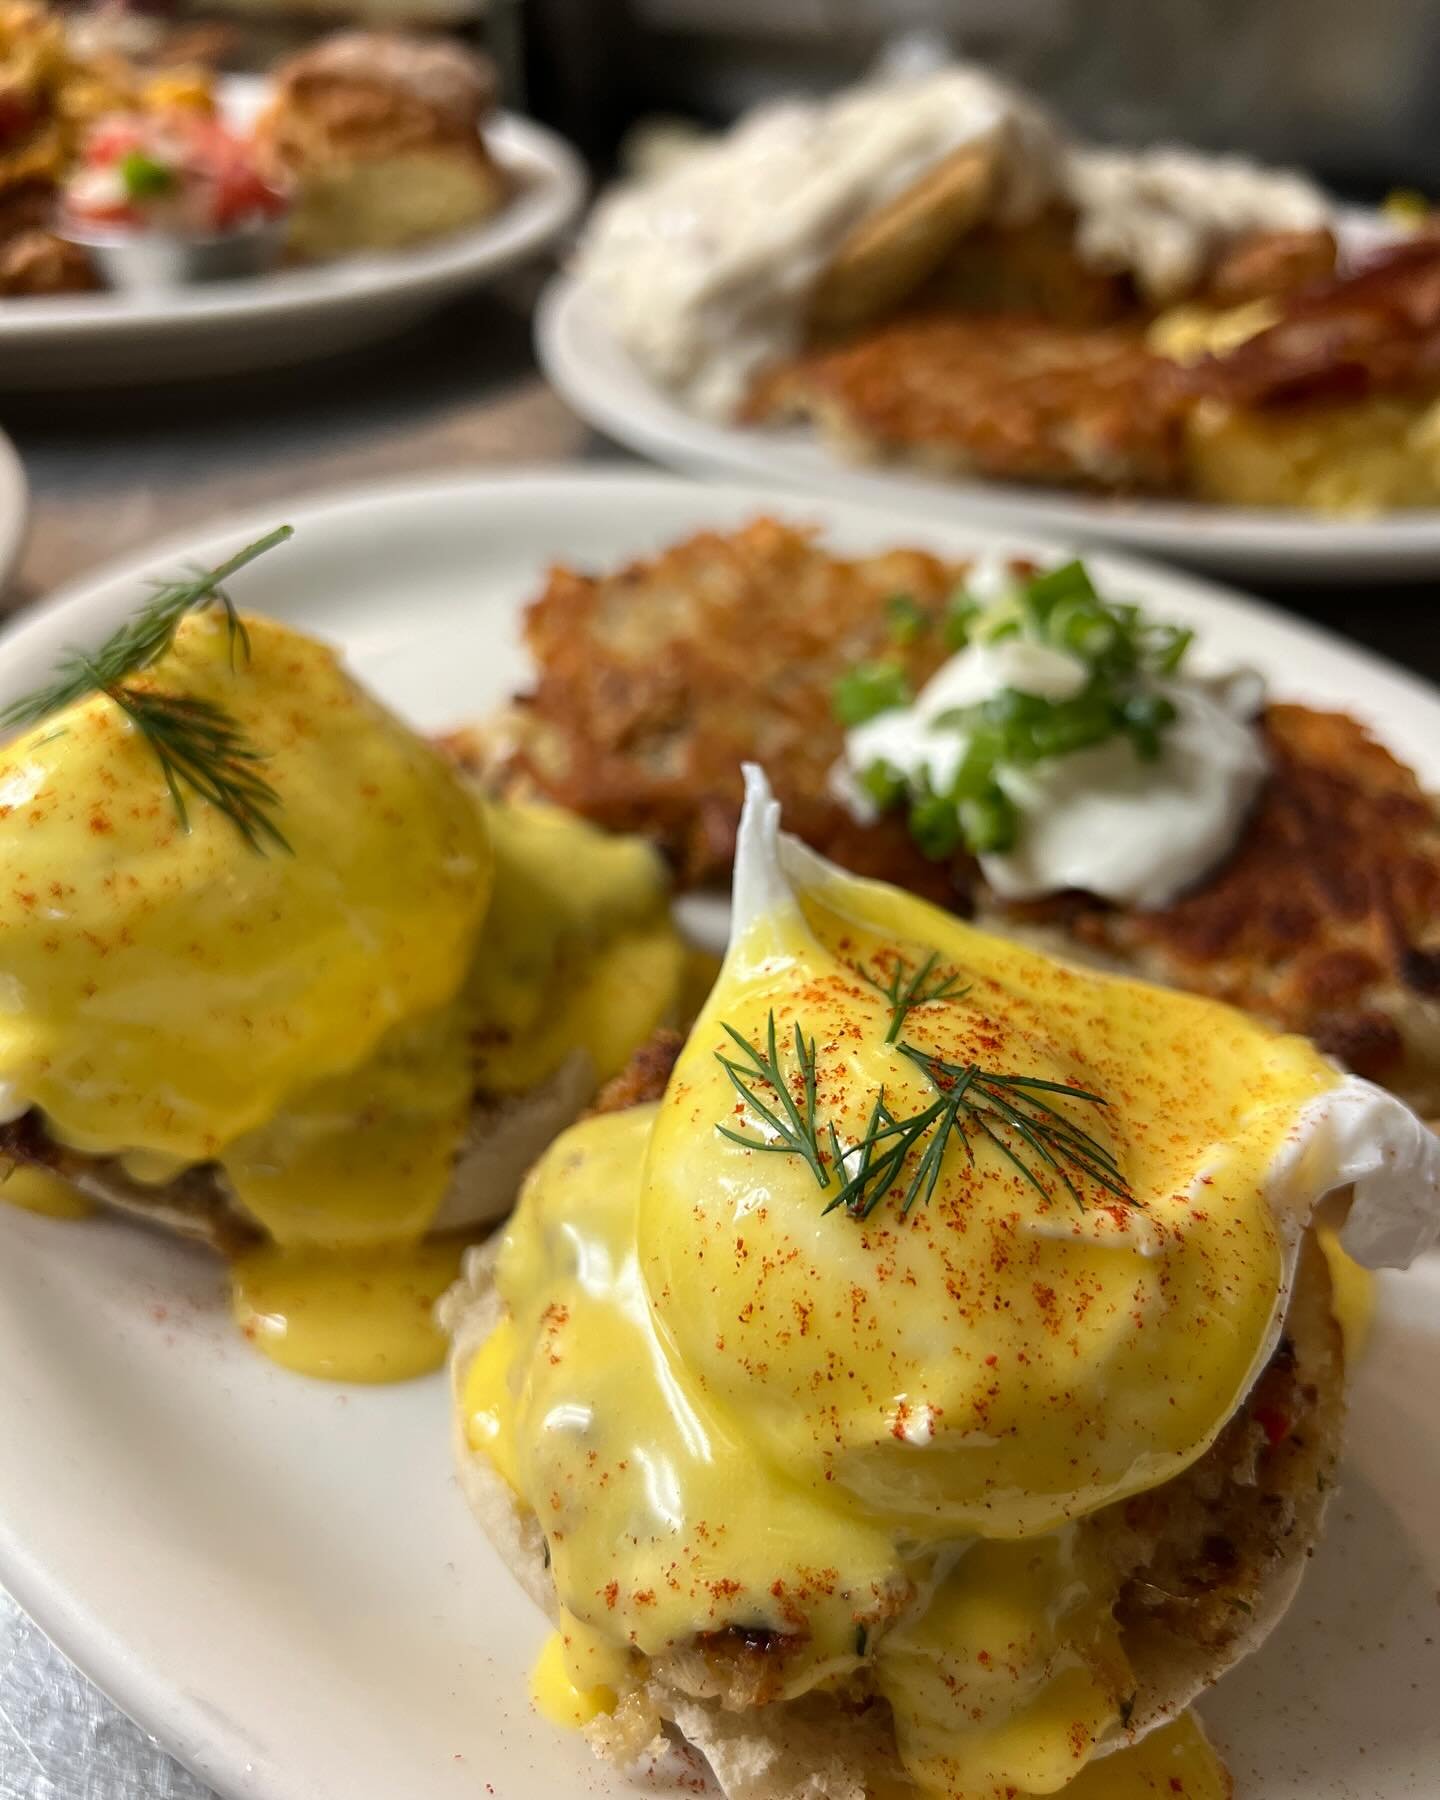 It wouldn&rsquo;t be a proper Mother&rsquo;s Day without a Crab Cake Benedict special now would it?! Bring your mamas in and treat them to a delicious special and pint sized mimosa because they deserve it! See y&rsquo;all soon 🌸🤍

#crabcakes #crabc